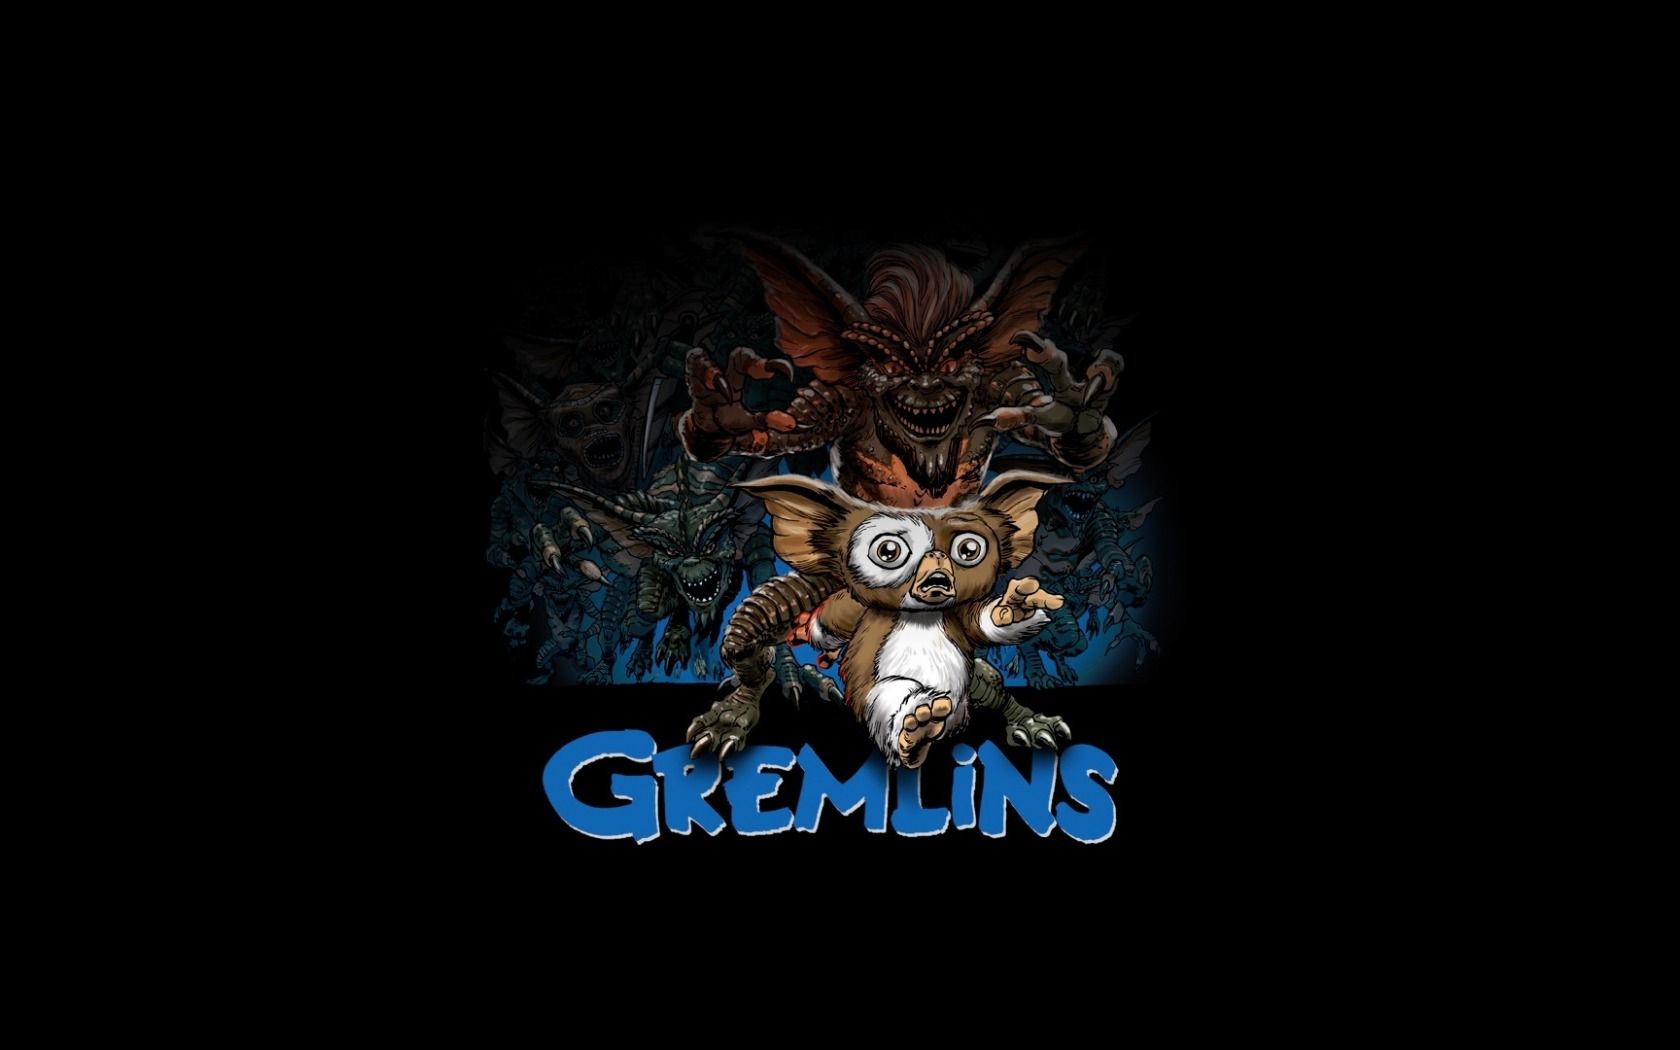 Wallpaper Gremlins Mythical Creature Eared Gizmo